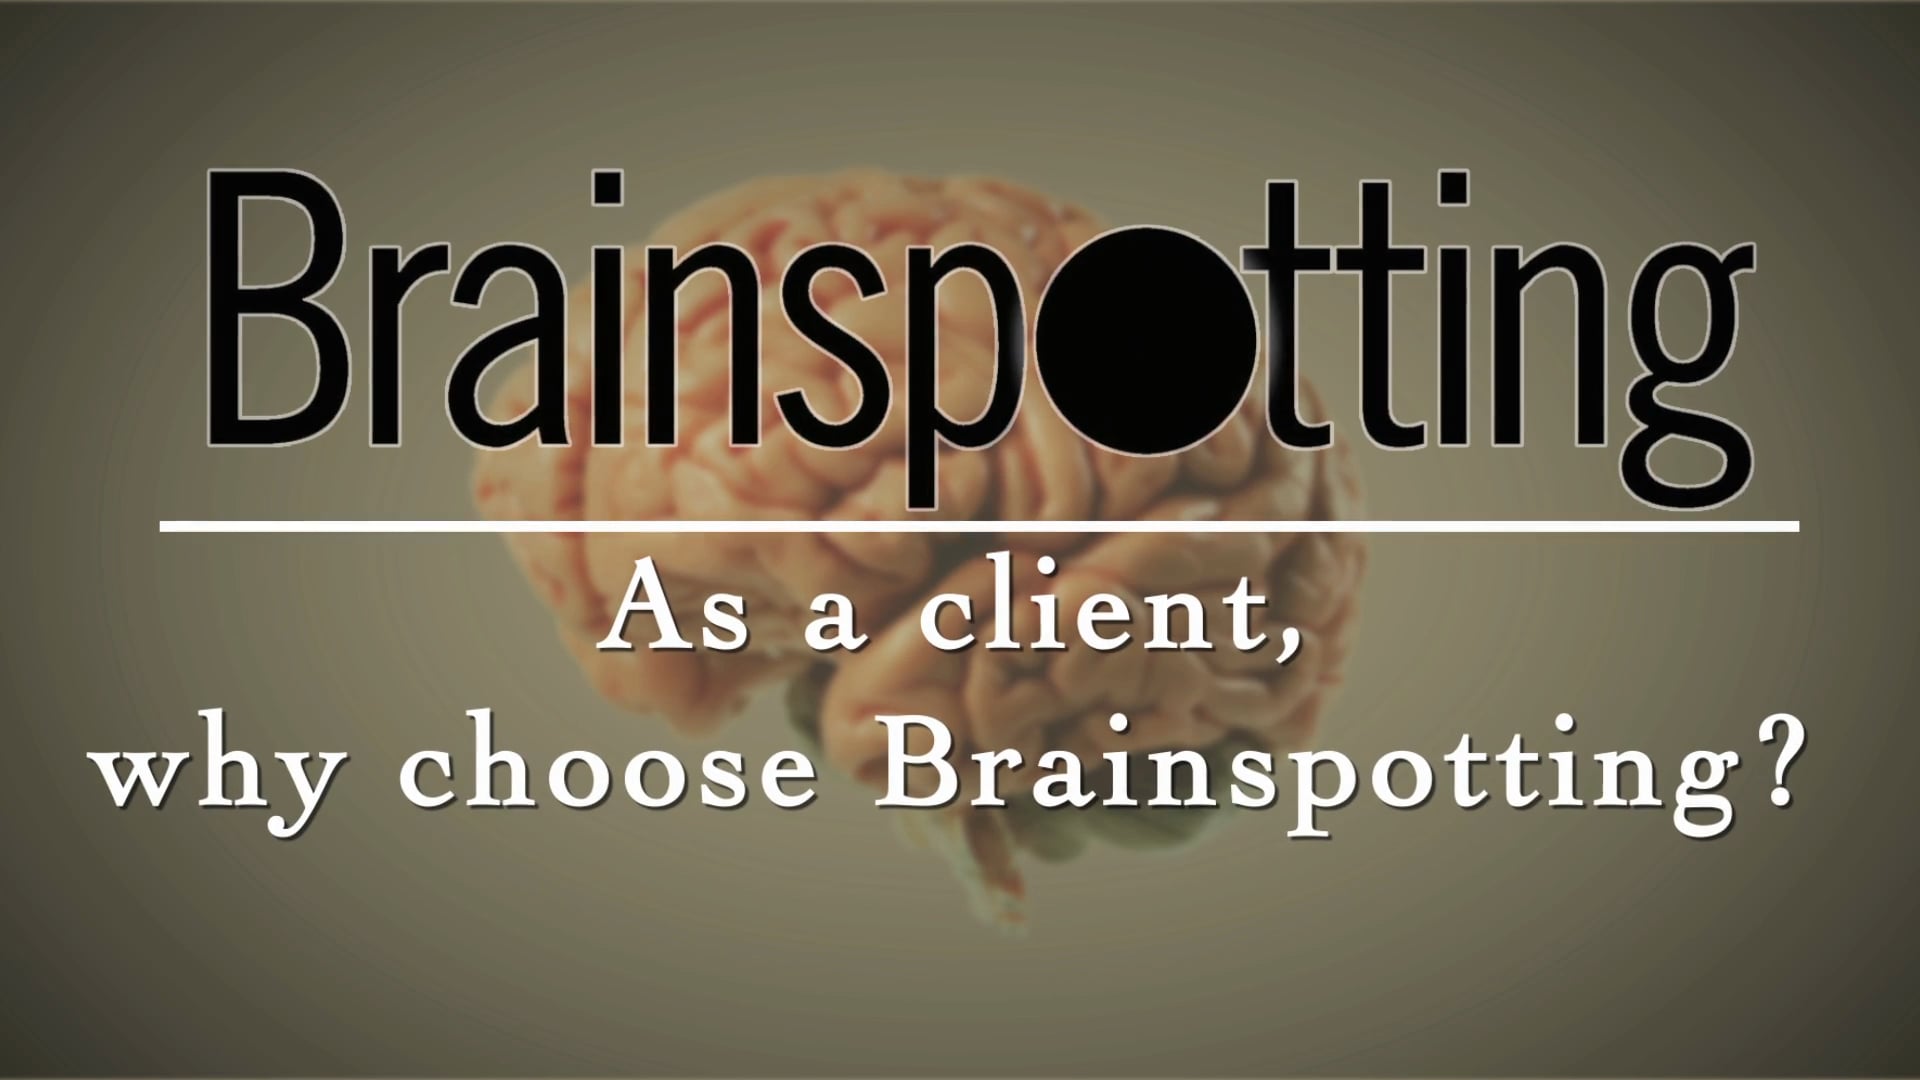 As a client, why choose Brainspotting?